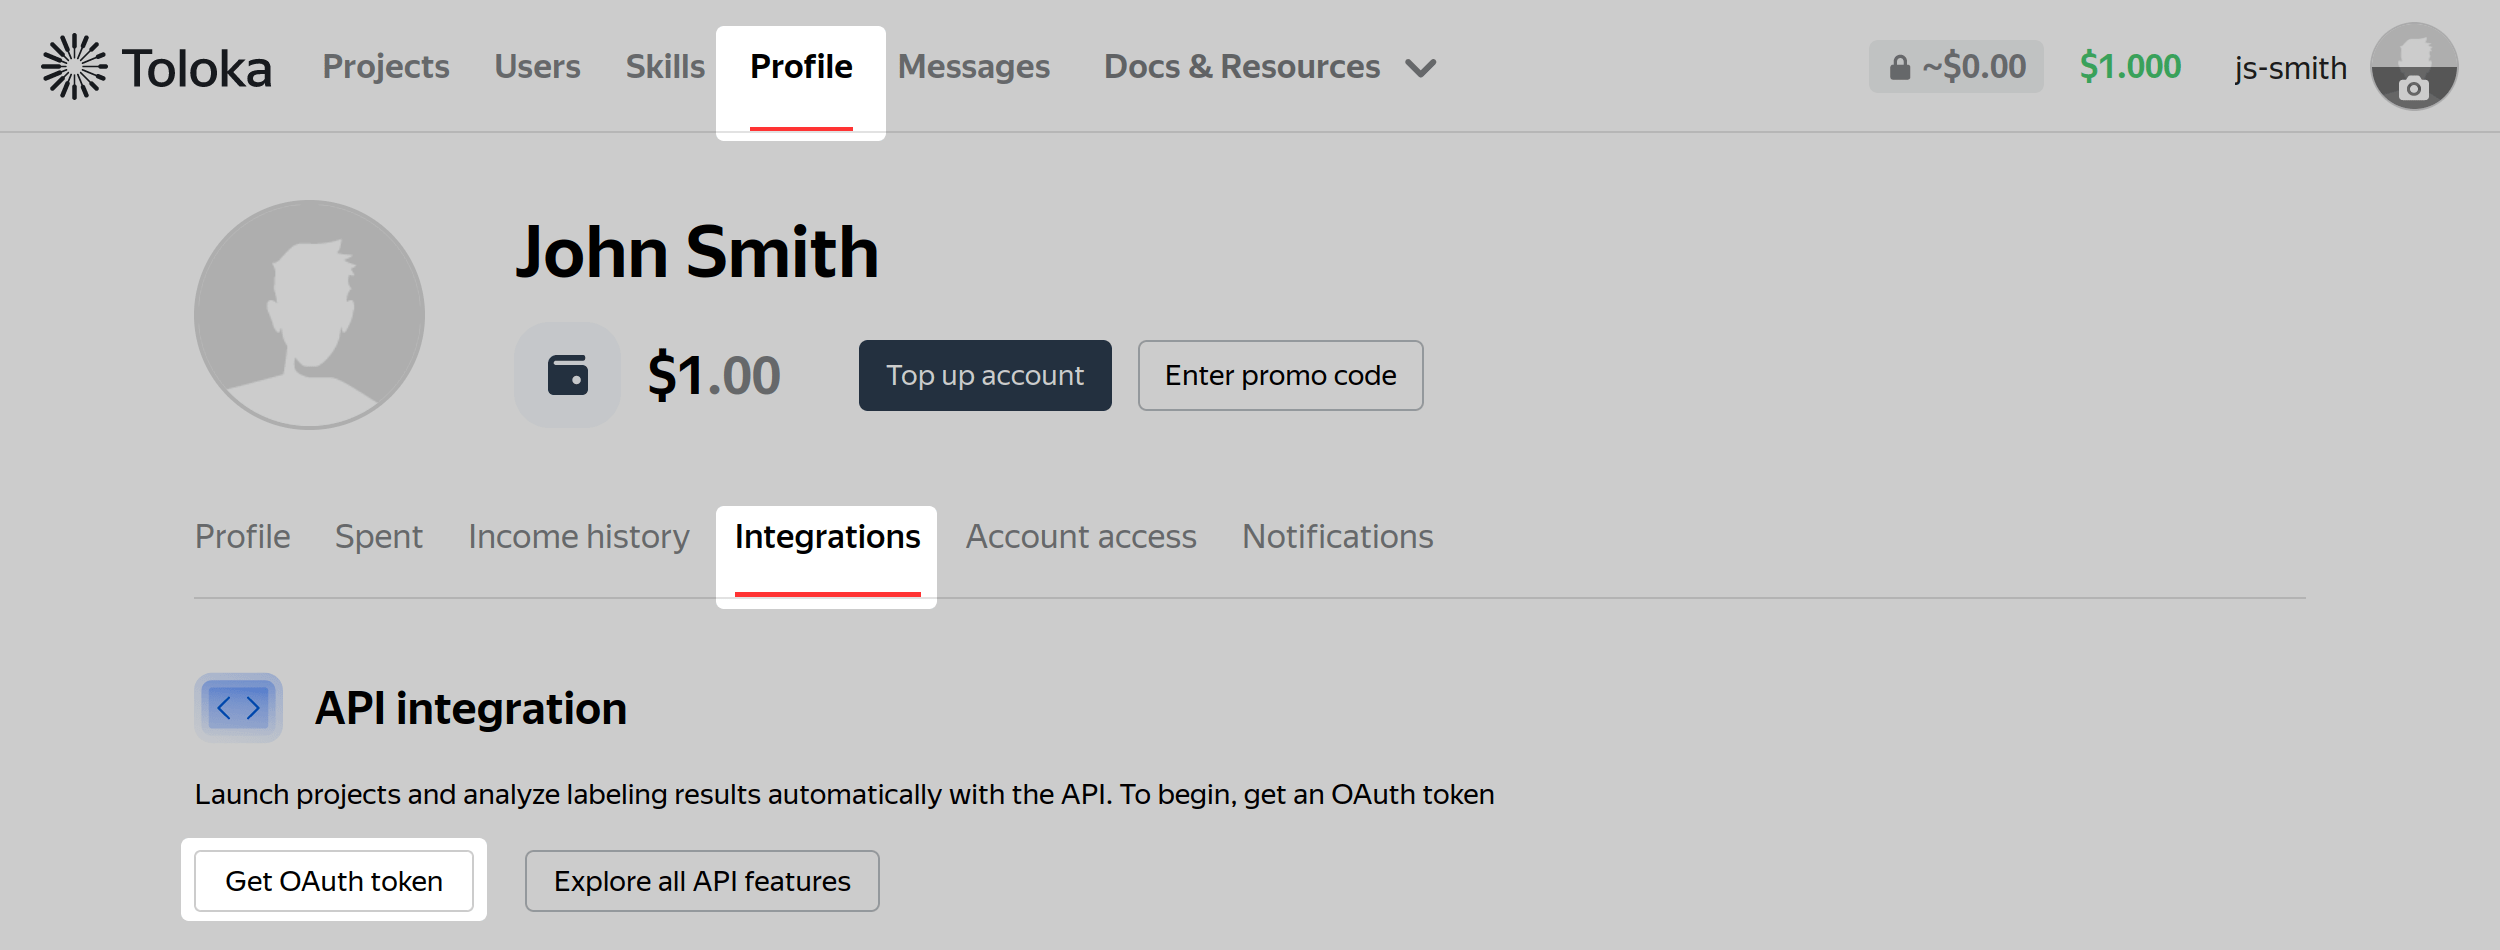 How to get an OAuth token